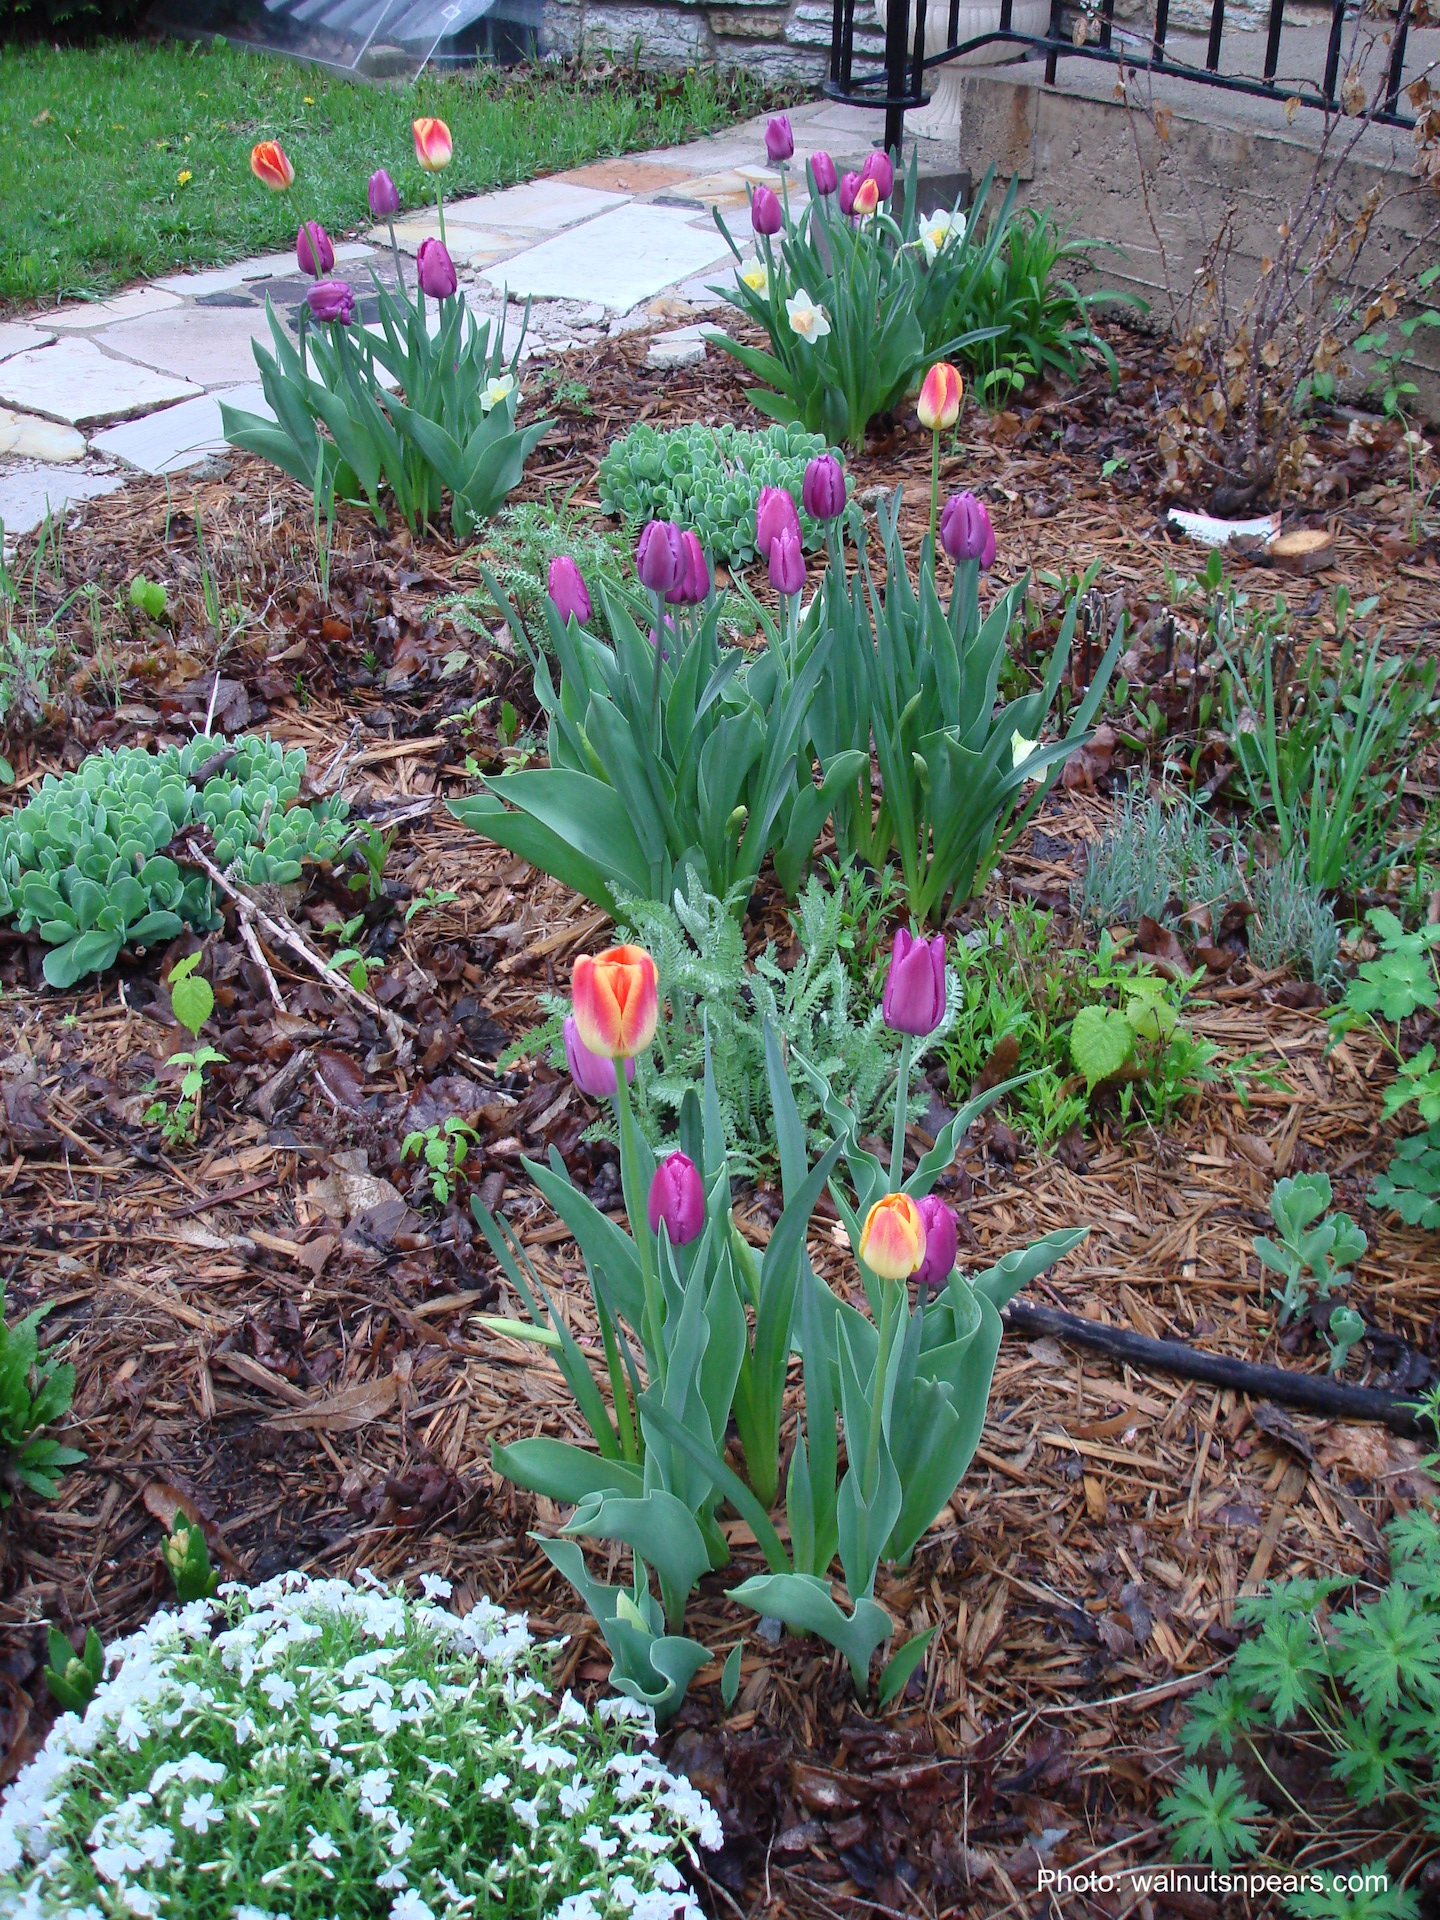 Flowerbed with clumps of tulips and daffodils